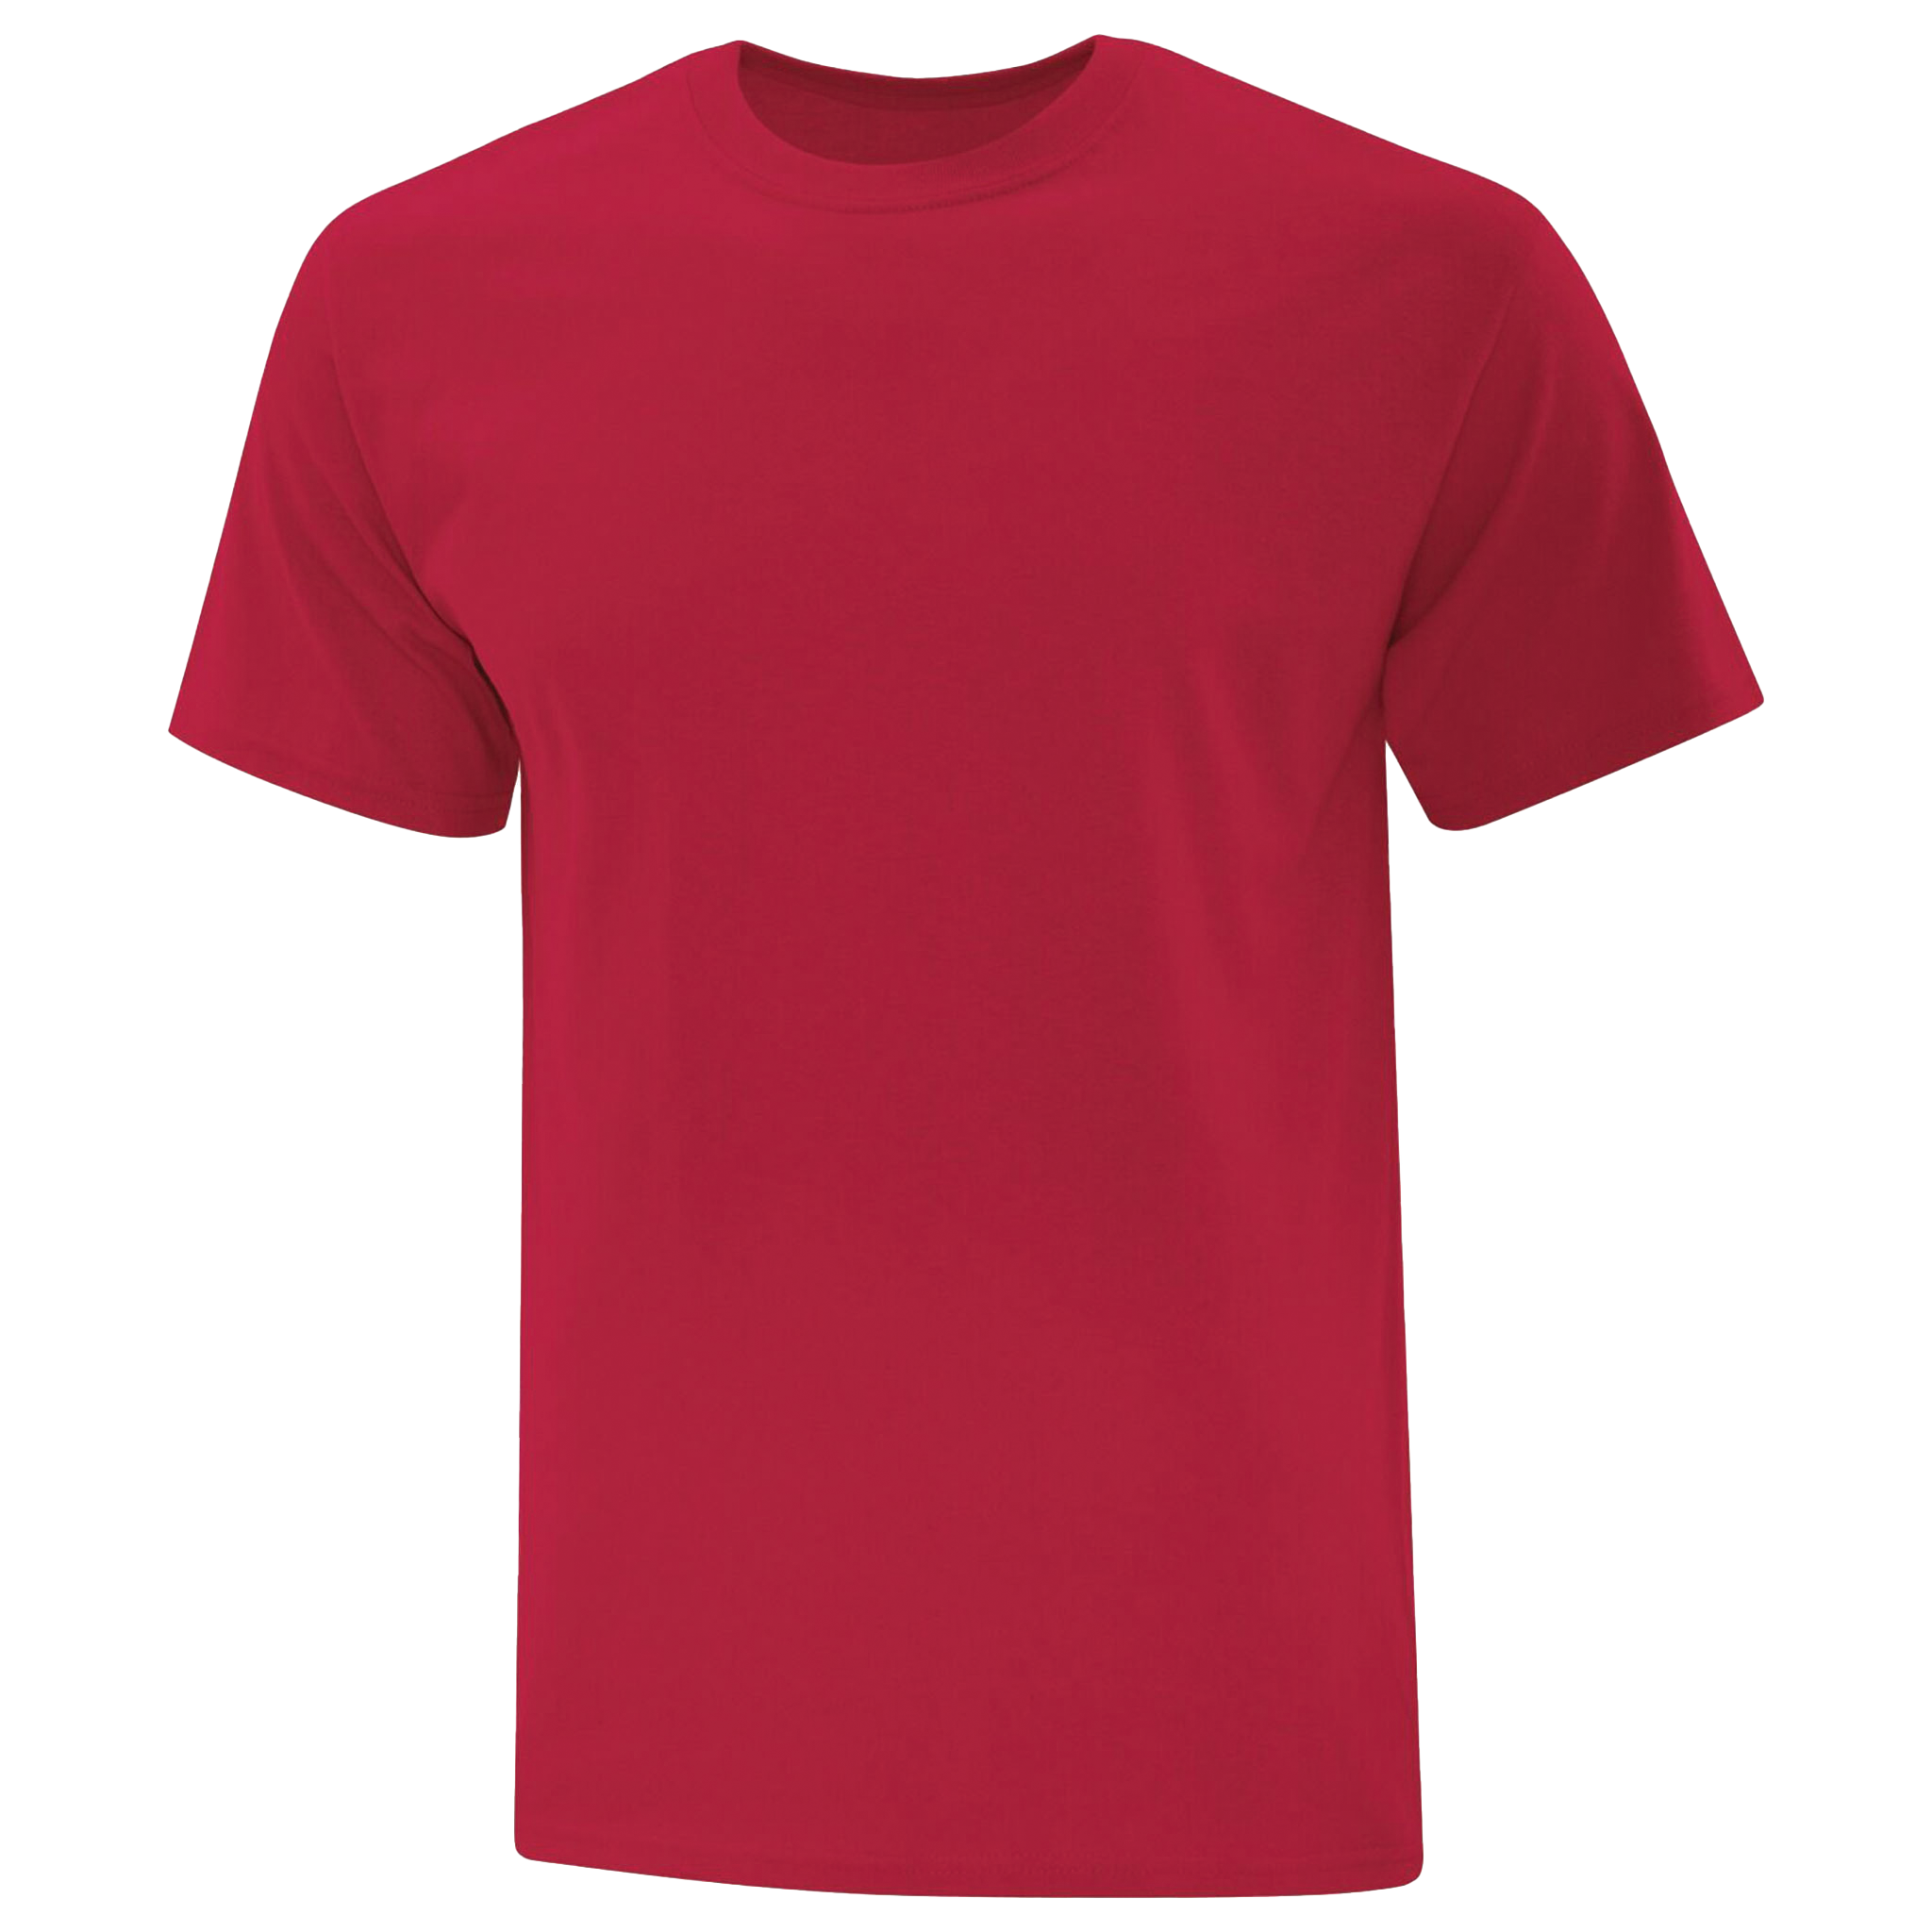 ATC Everyday Cotton T-Shirt - Men's Sizing S-4XL - Red